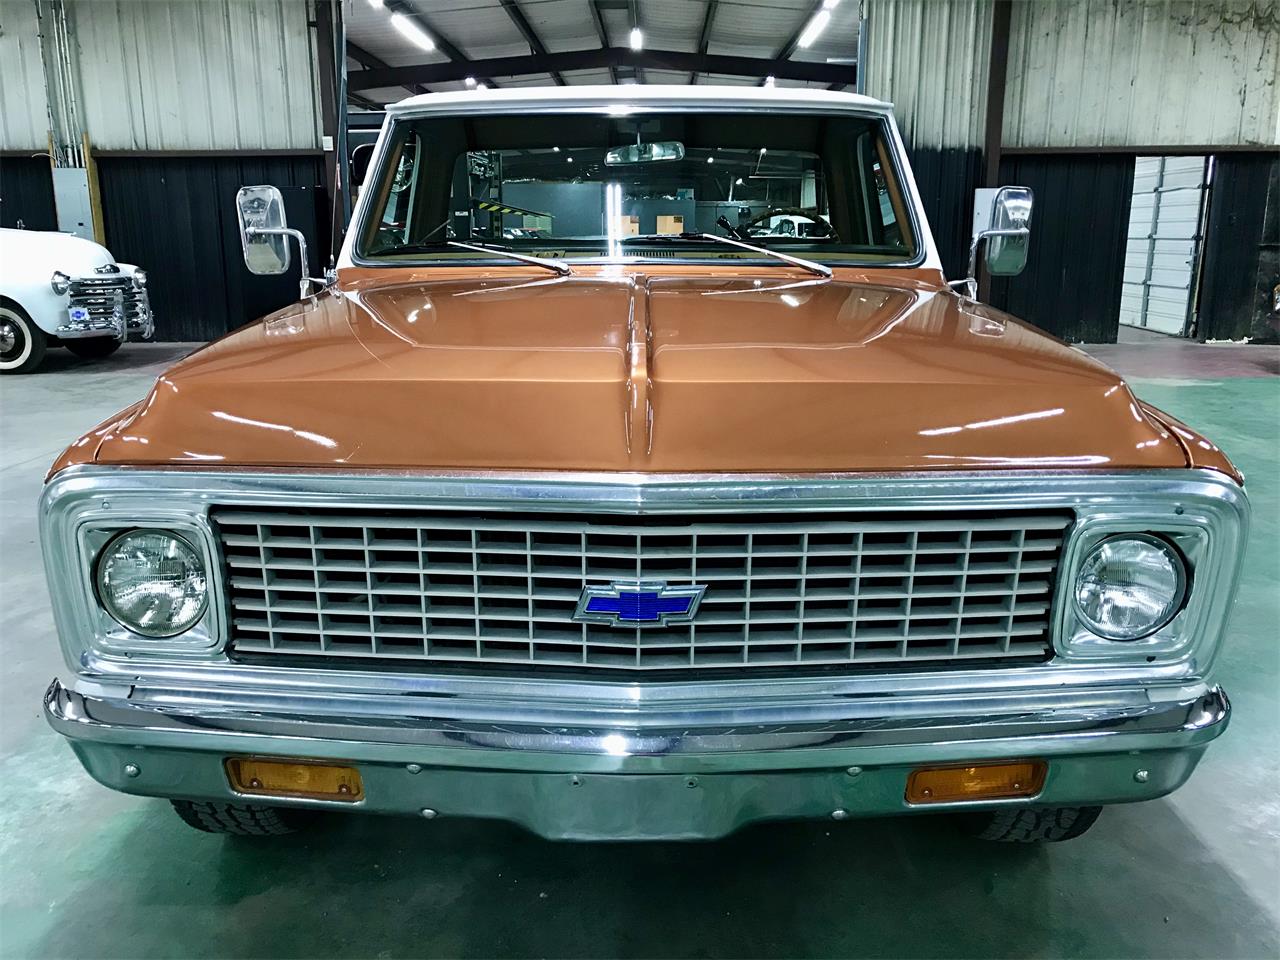 1971 Chevrolet C20 is listed Verkauft on ClassicDigest in Pleasanton by